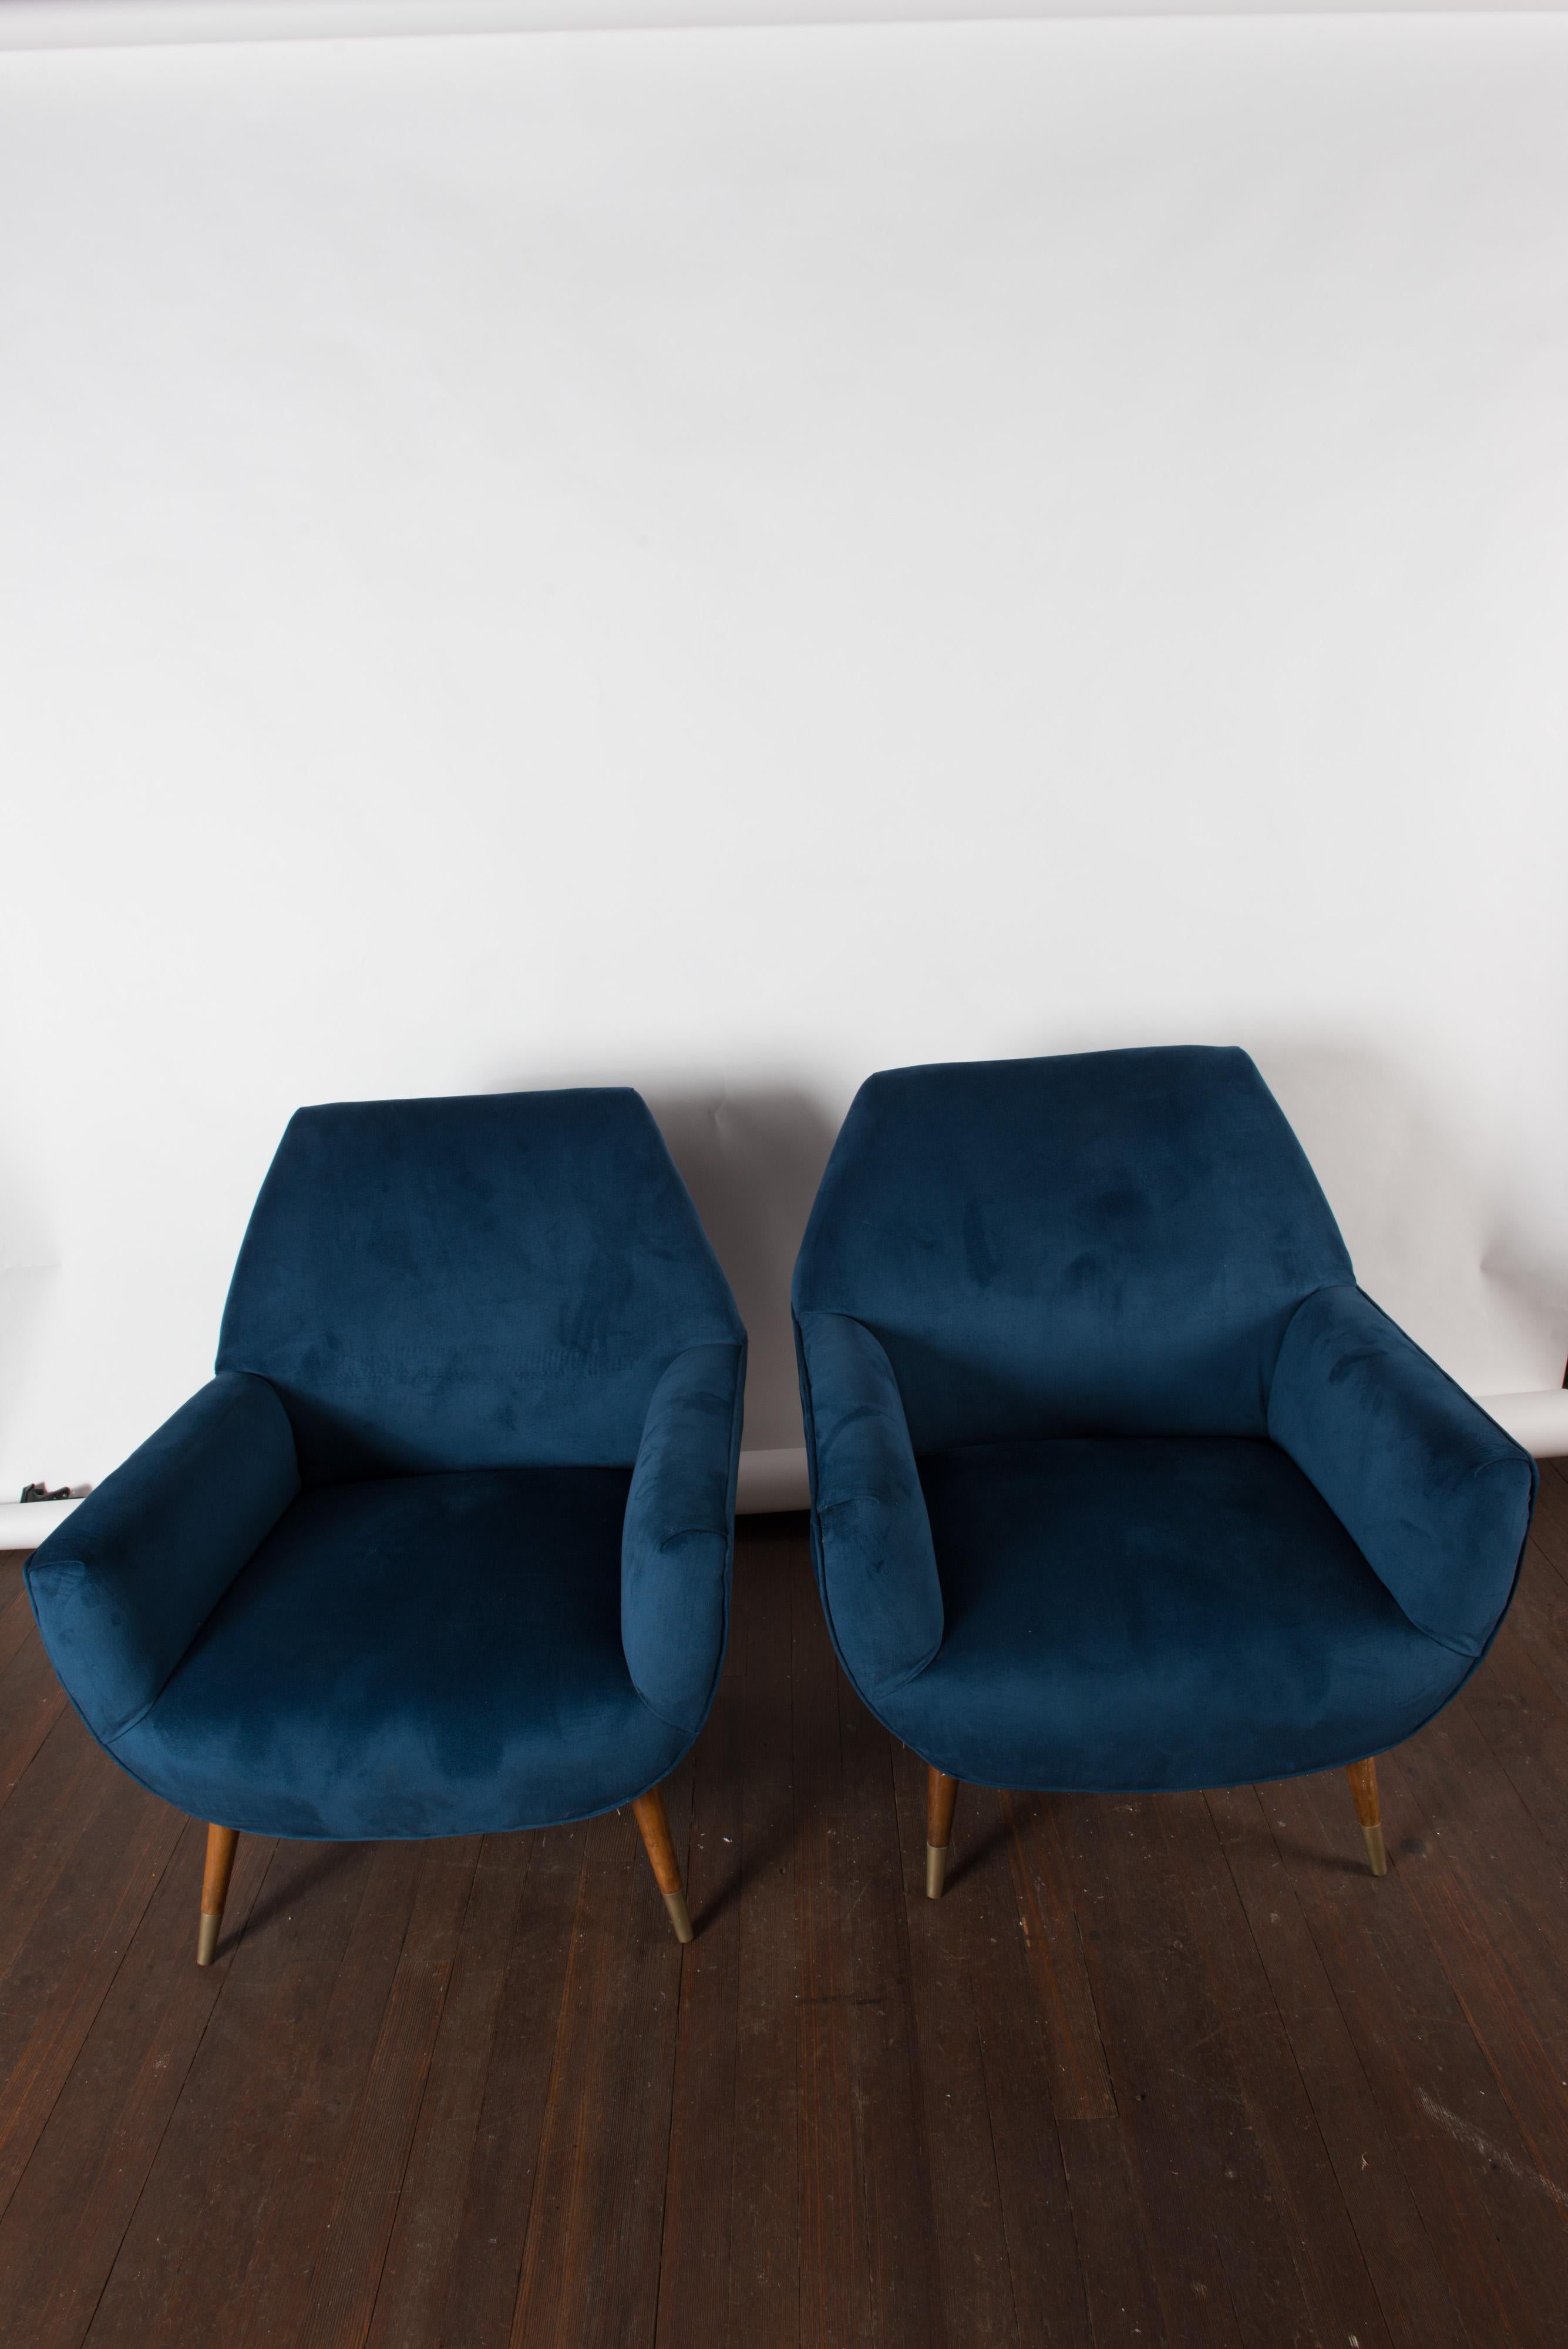 Newly upholstered in blue velvet, a pair of Mid-Century Modern Italian lounge chairs.
Wood legs with brass feet.